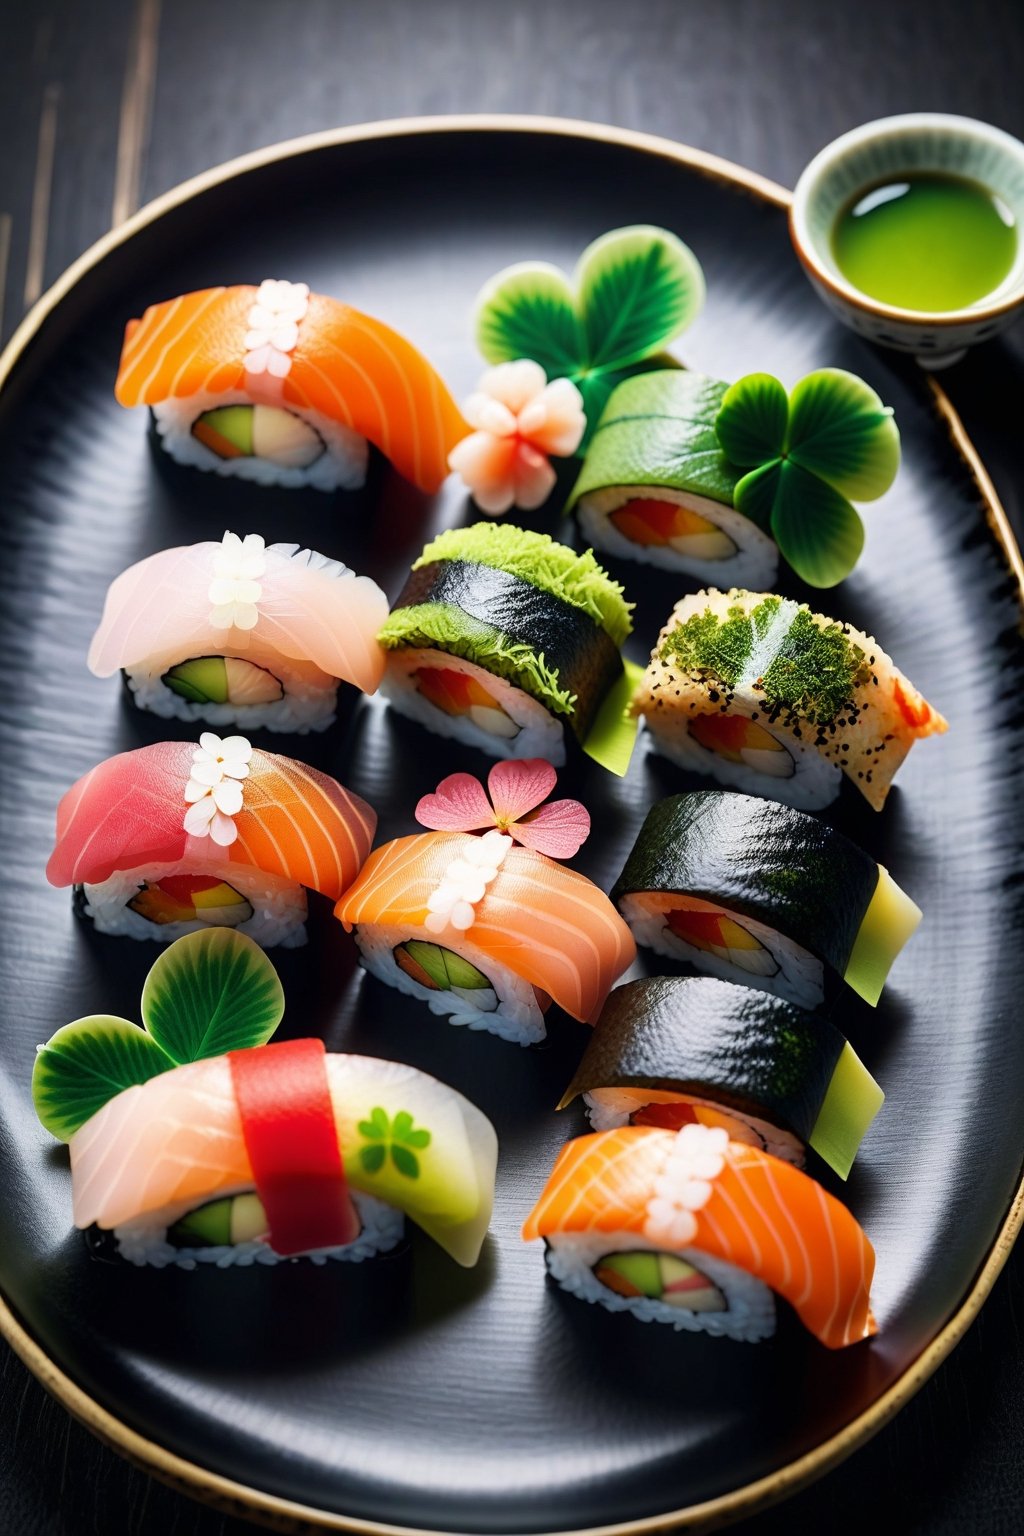 score_9, score_8_up, score_7_up, score_6_up, score_5_up, score_4_up, (Masterpiece, Best Quality:1.5), 
Advanced and gorgeous clover sushi cuisine and matcha,